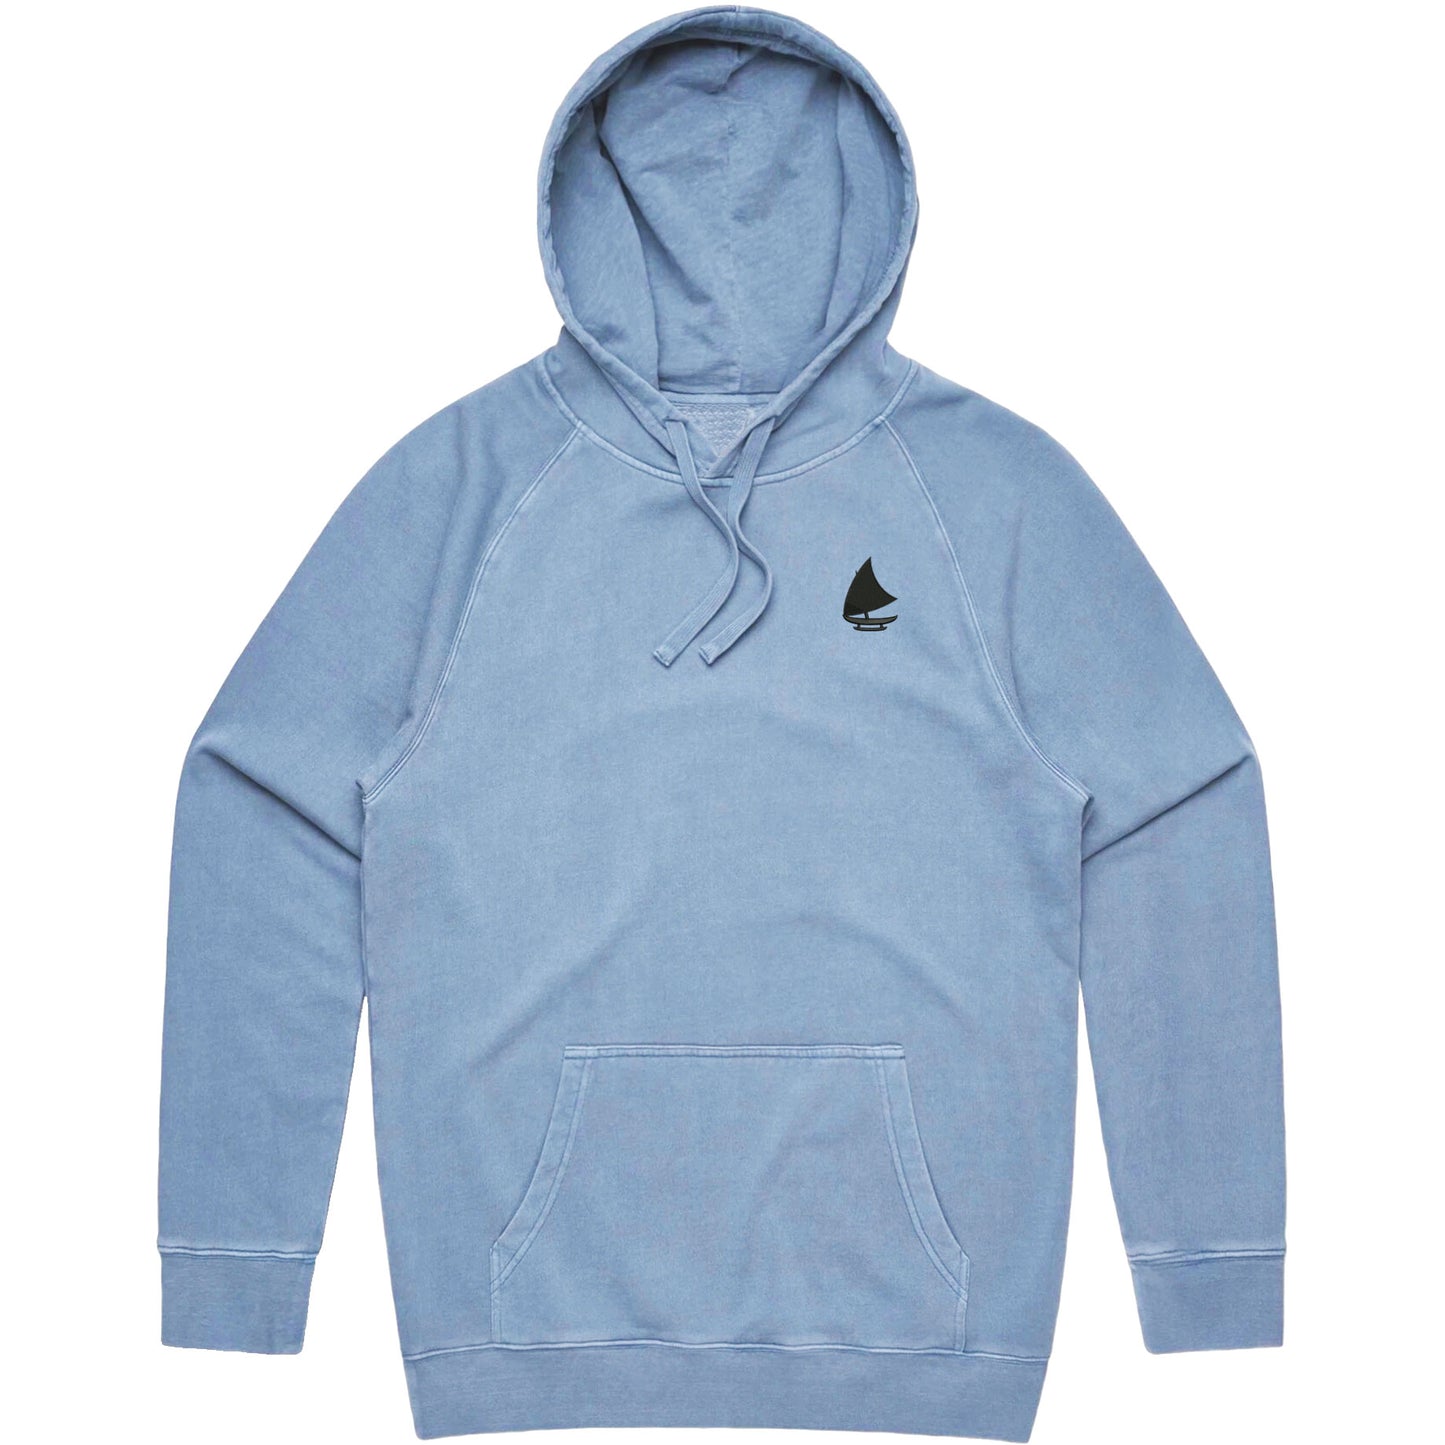 Proa Embroidered Hoodie - Faded Blue